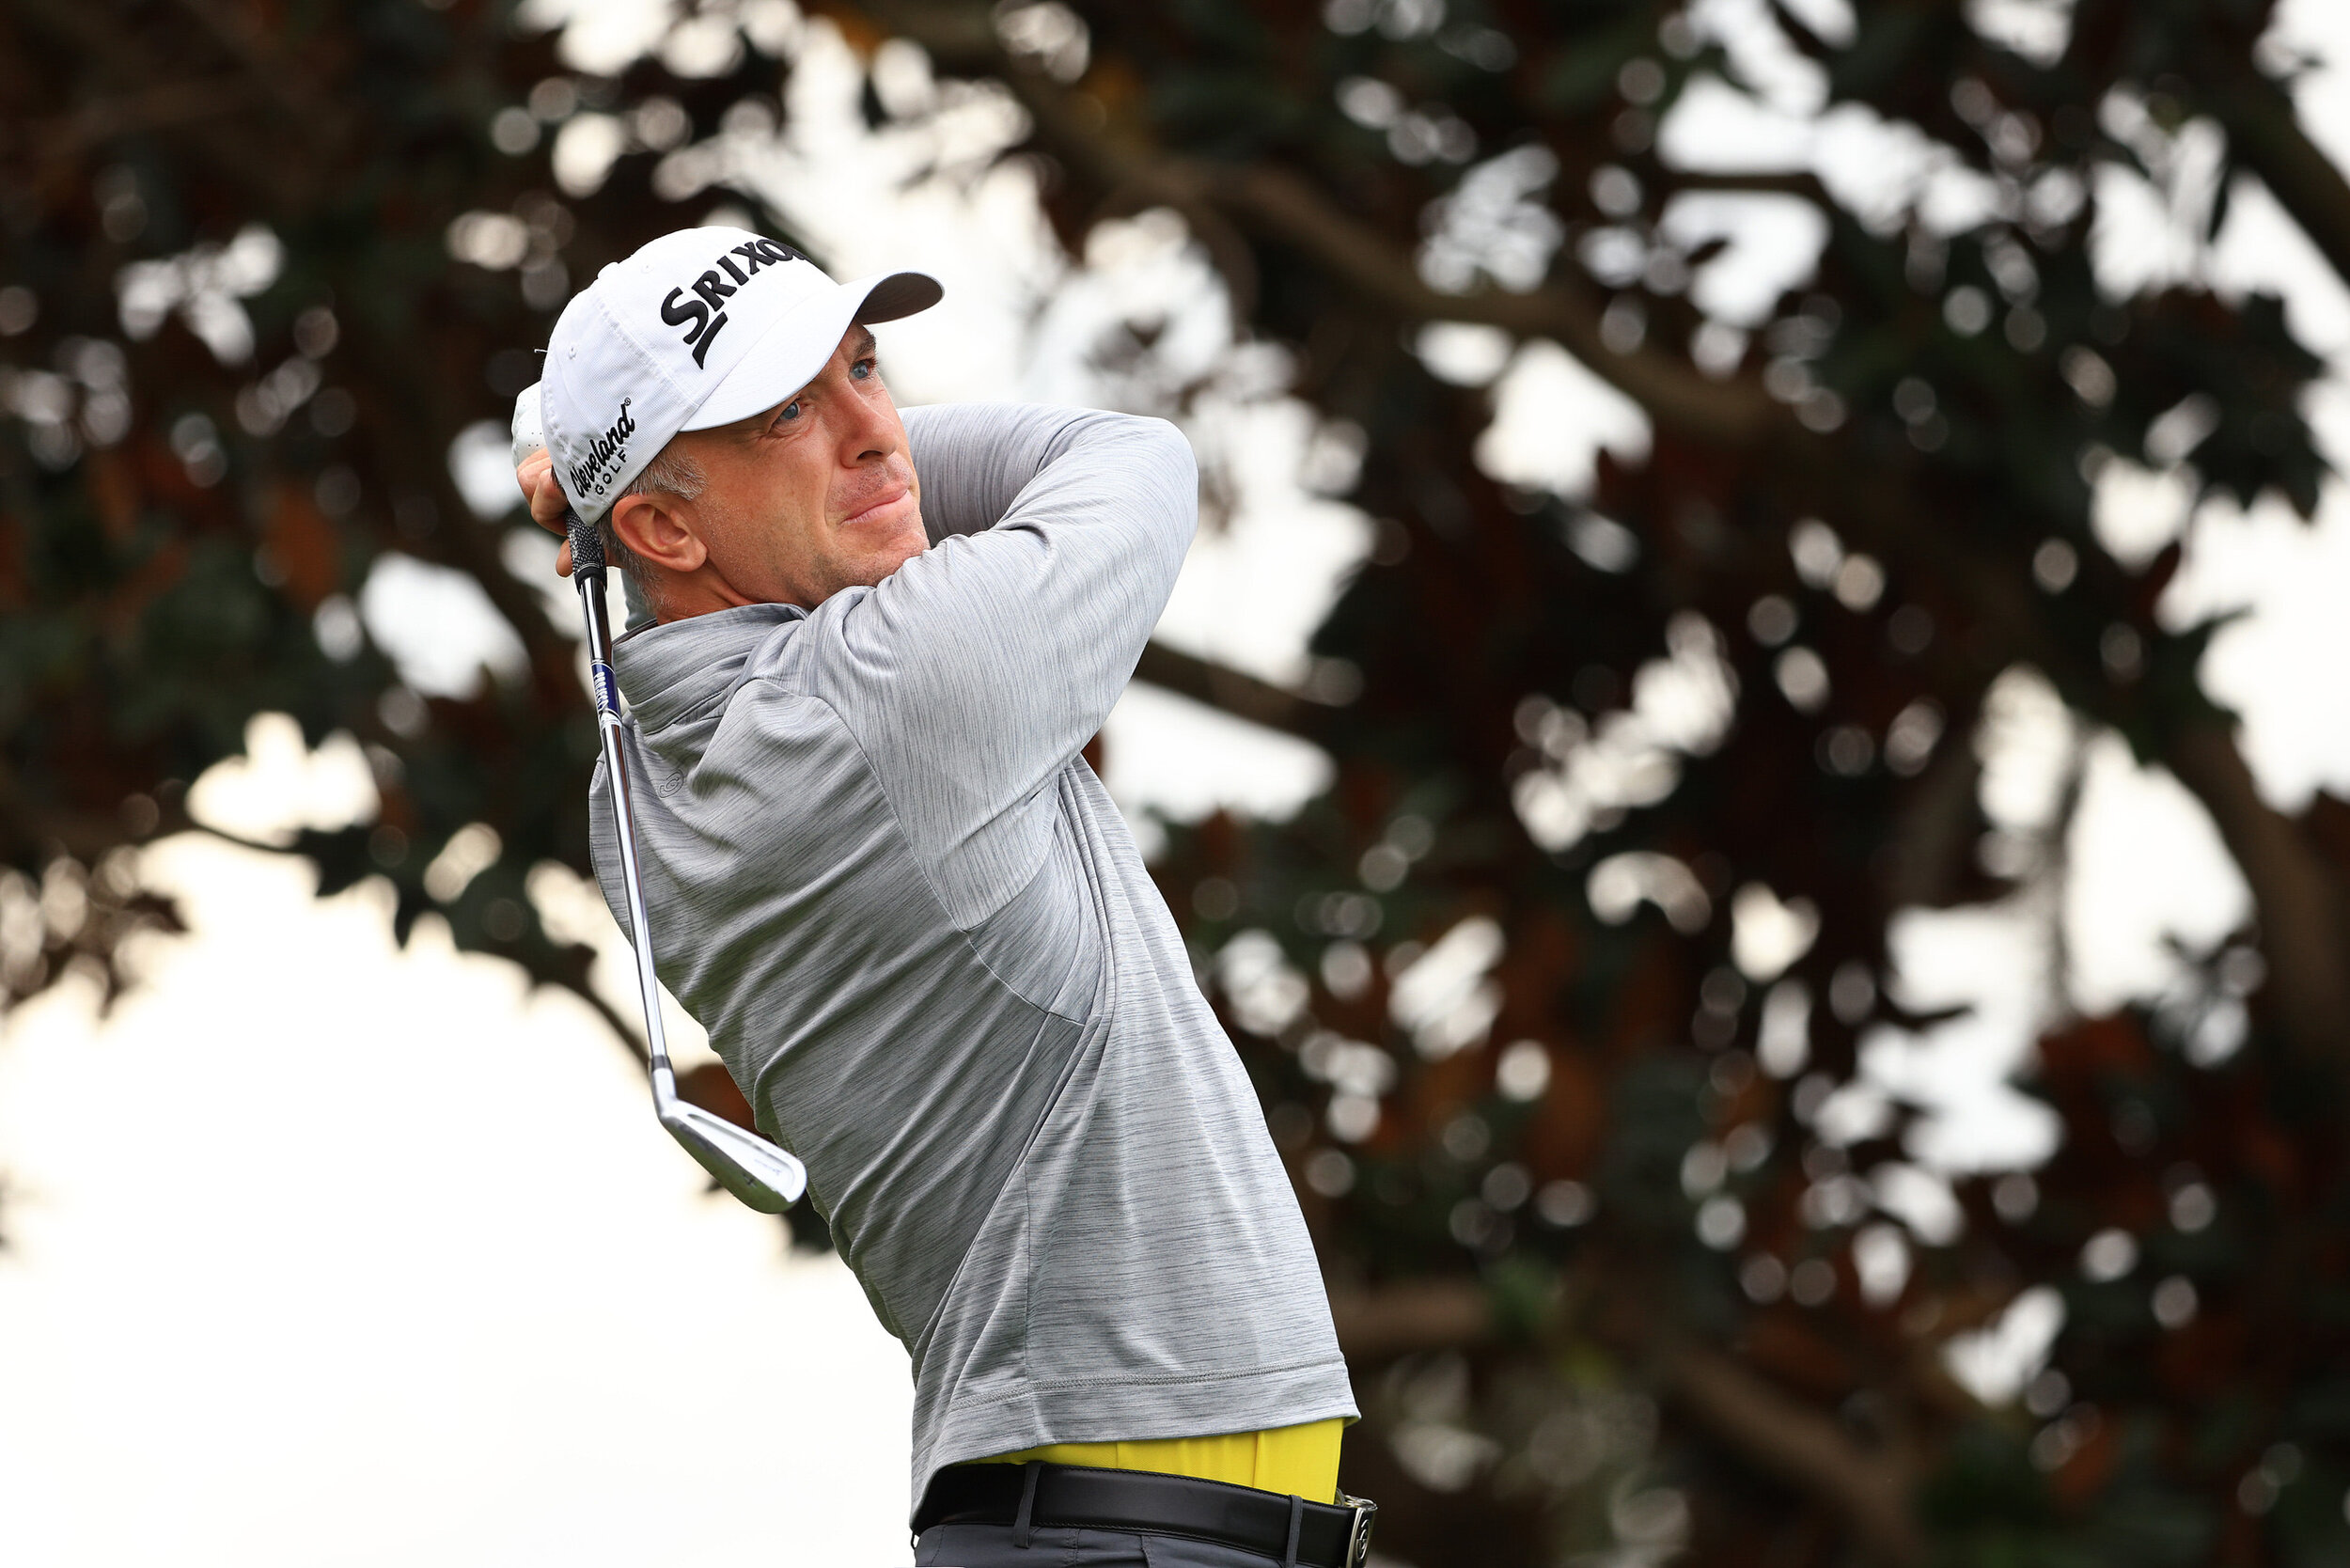  ORLANDO, FLORIDA - MARCH 06: Martin Laird of Scotland plays his shot from the second tee during the third round of the Arnold Palmer Invitational Presented by MasterCard at the Bay Hill Club and Lodge on March 06, 2021 in Orlando, Florida. (Photo by